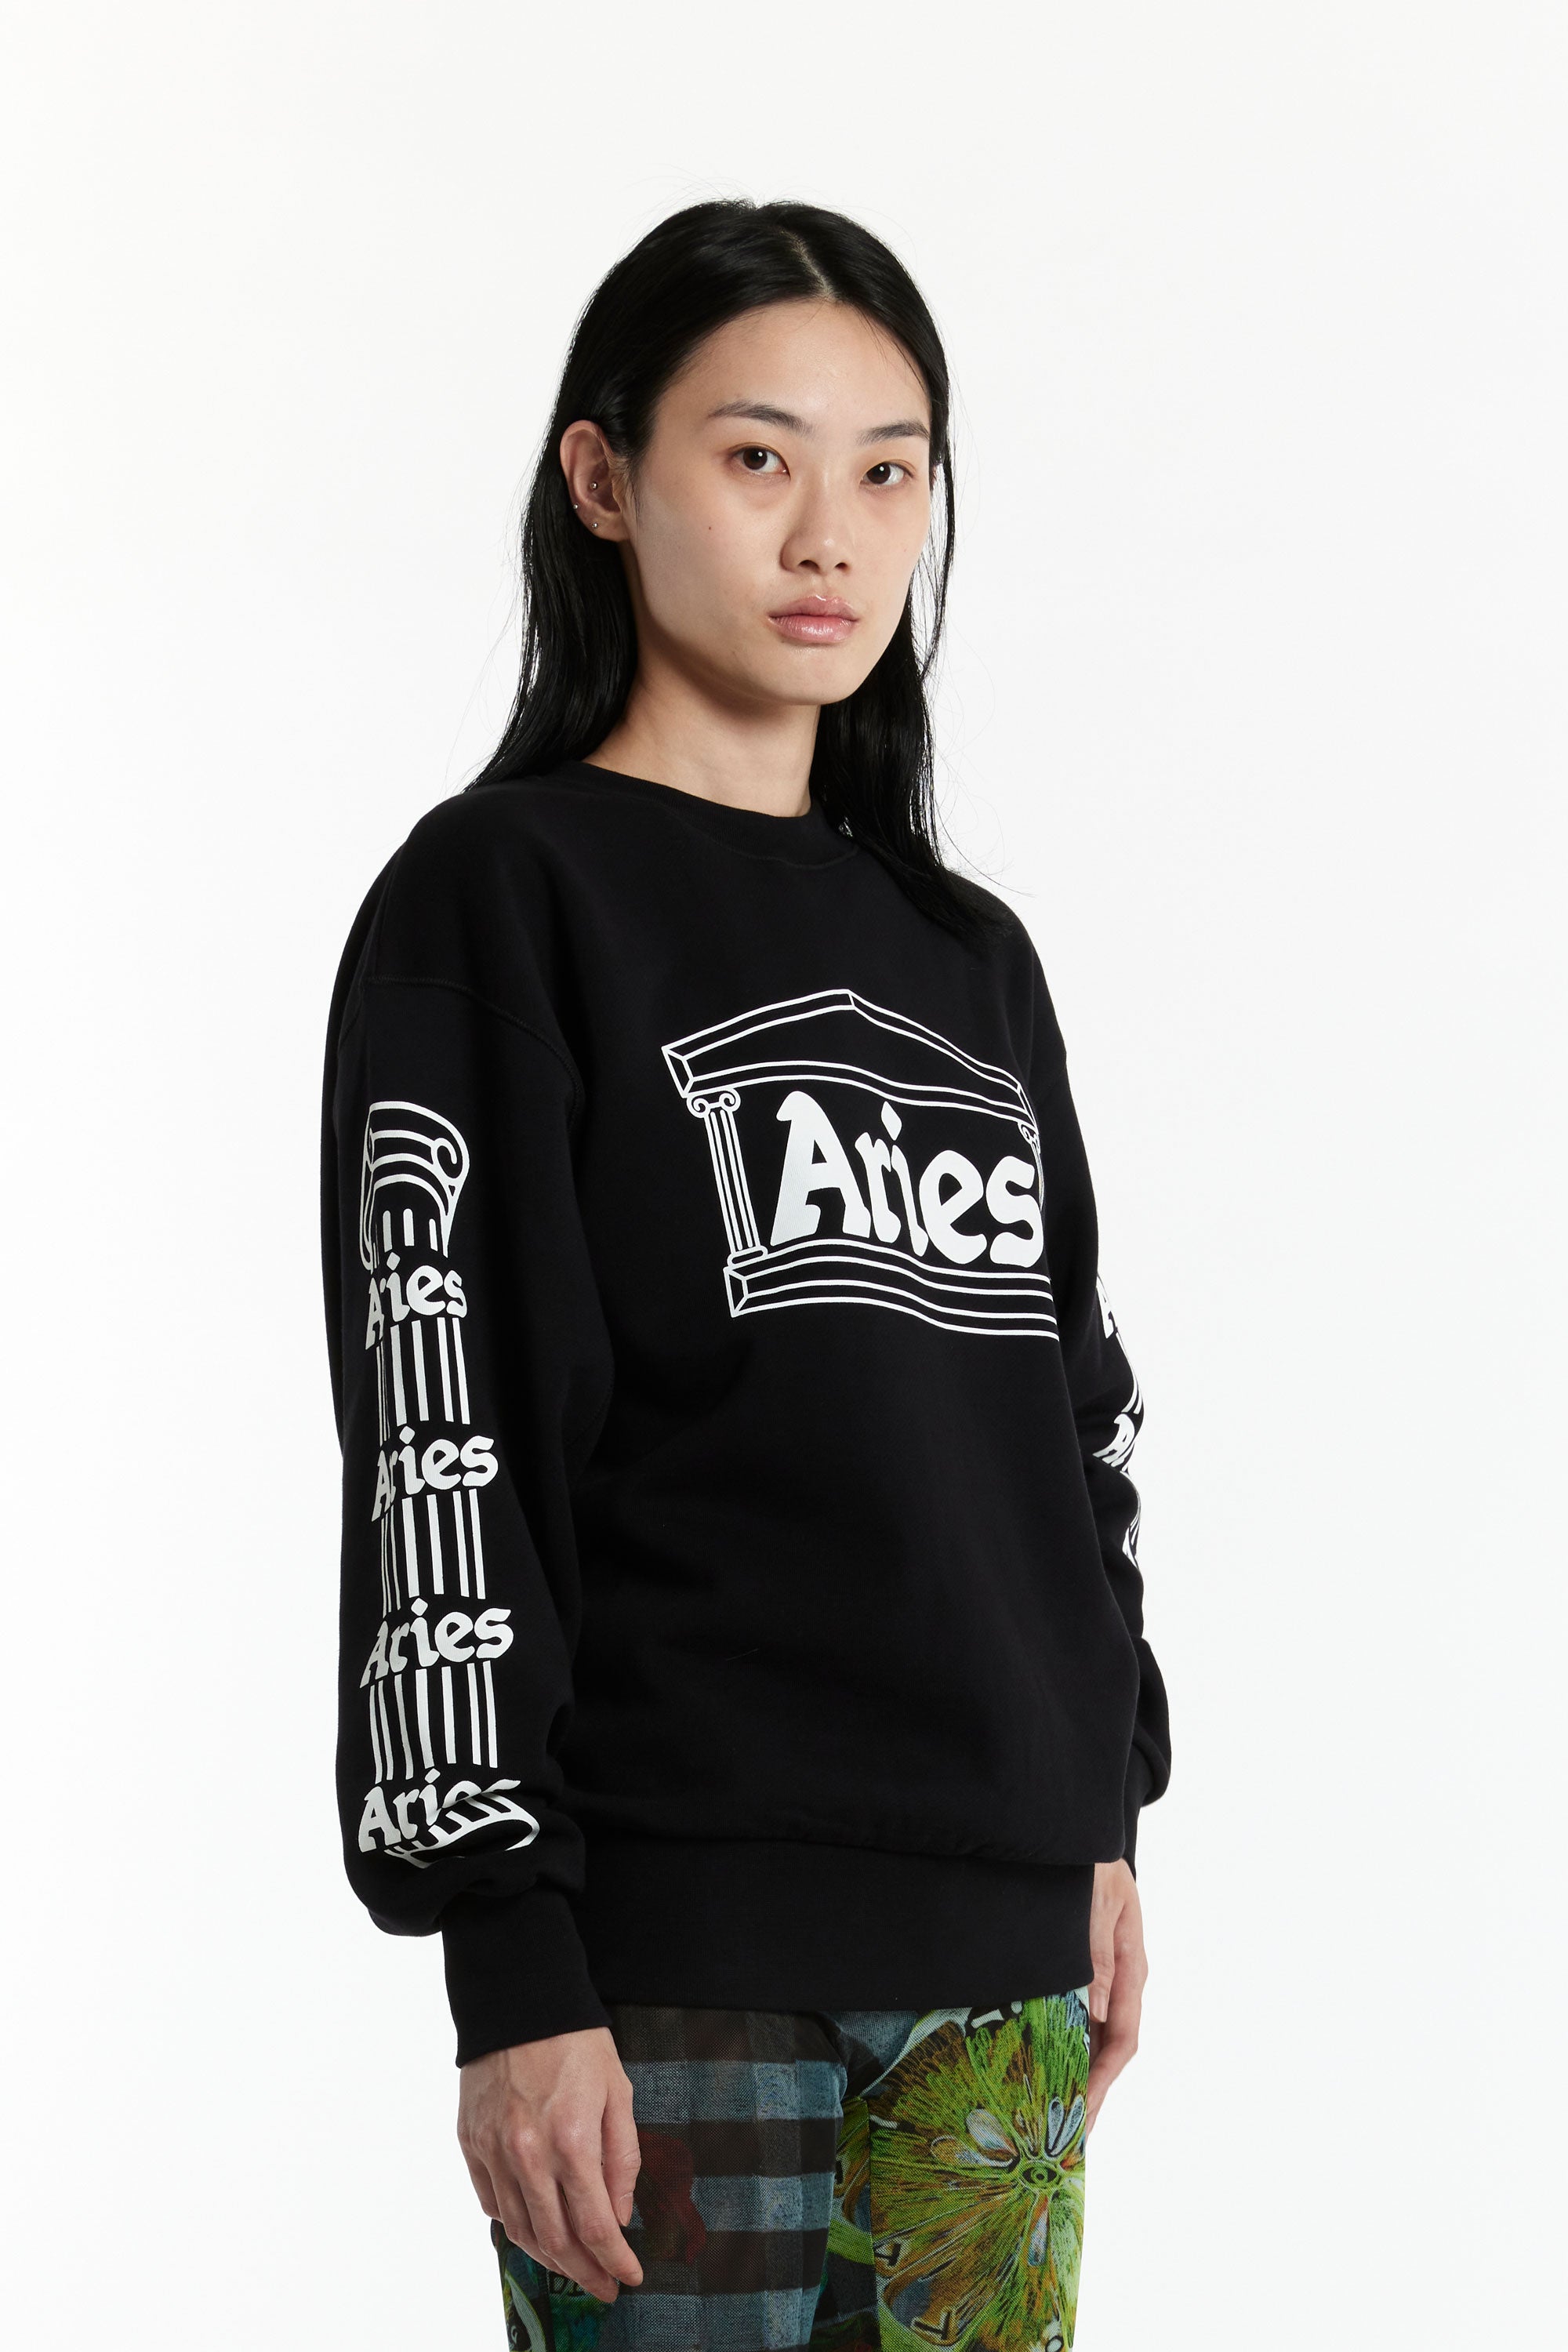 The ARIES - Column Sweatshirt SS23  available online with global shipping, and in PAM Stores Melbourne and Sydney.